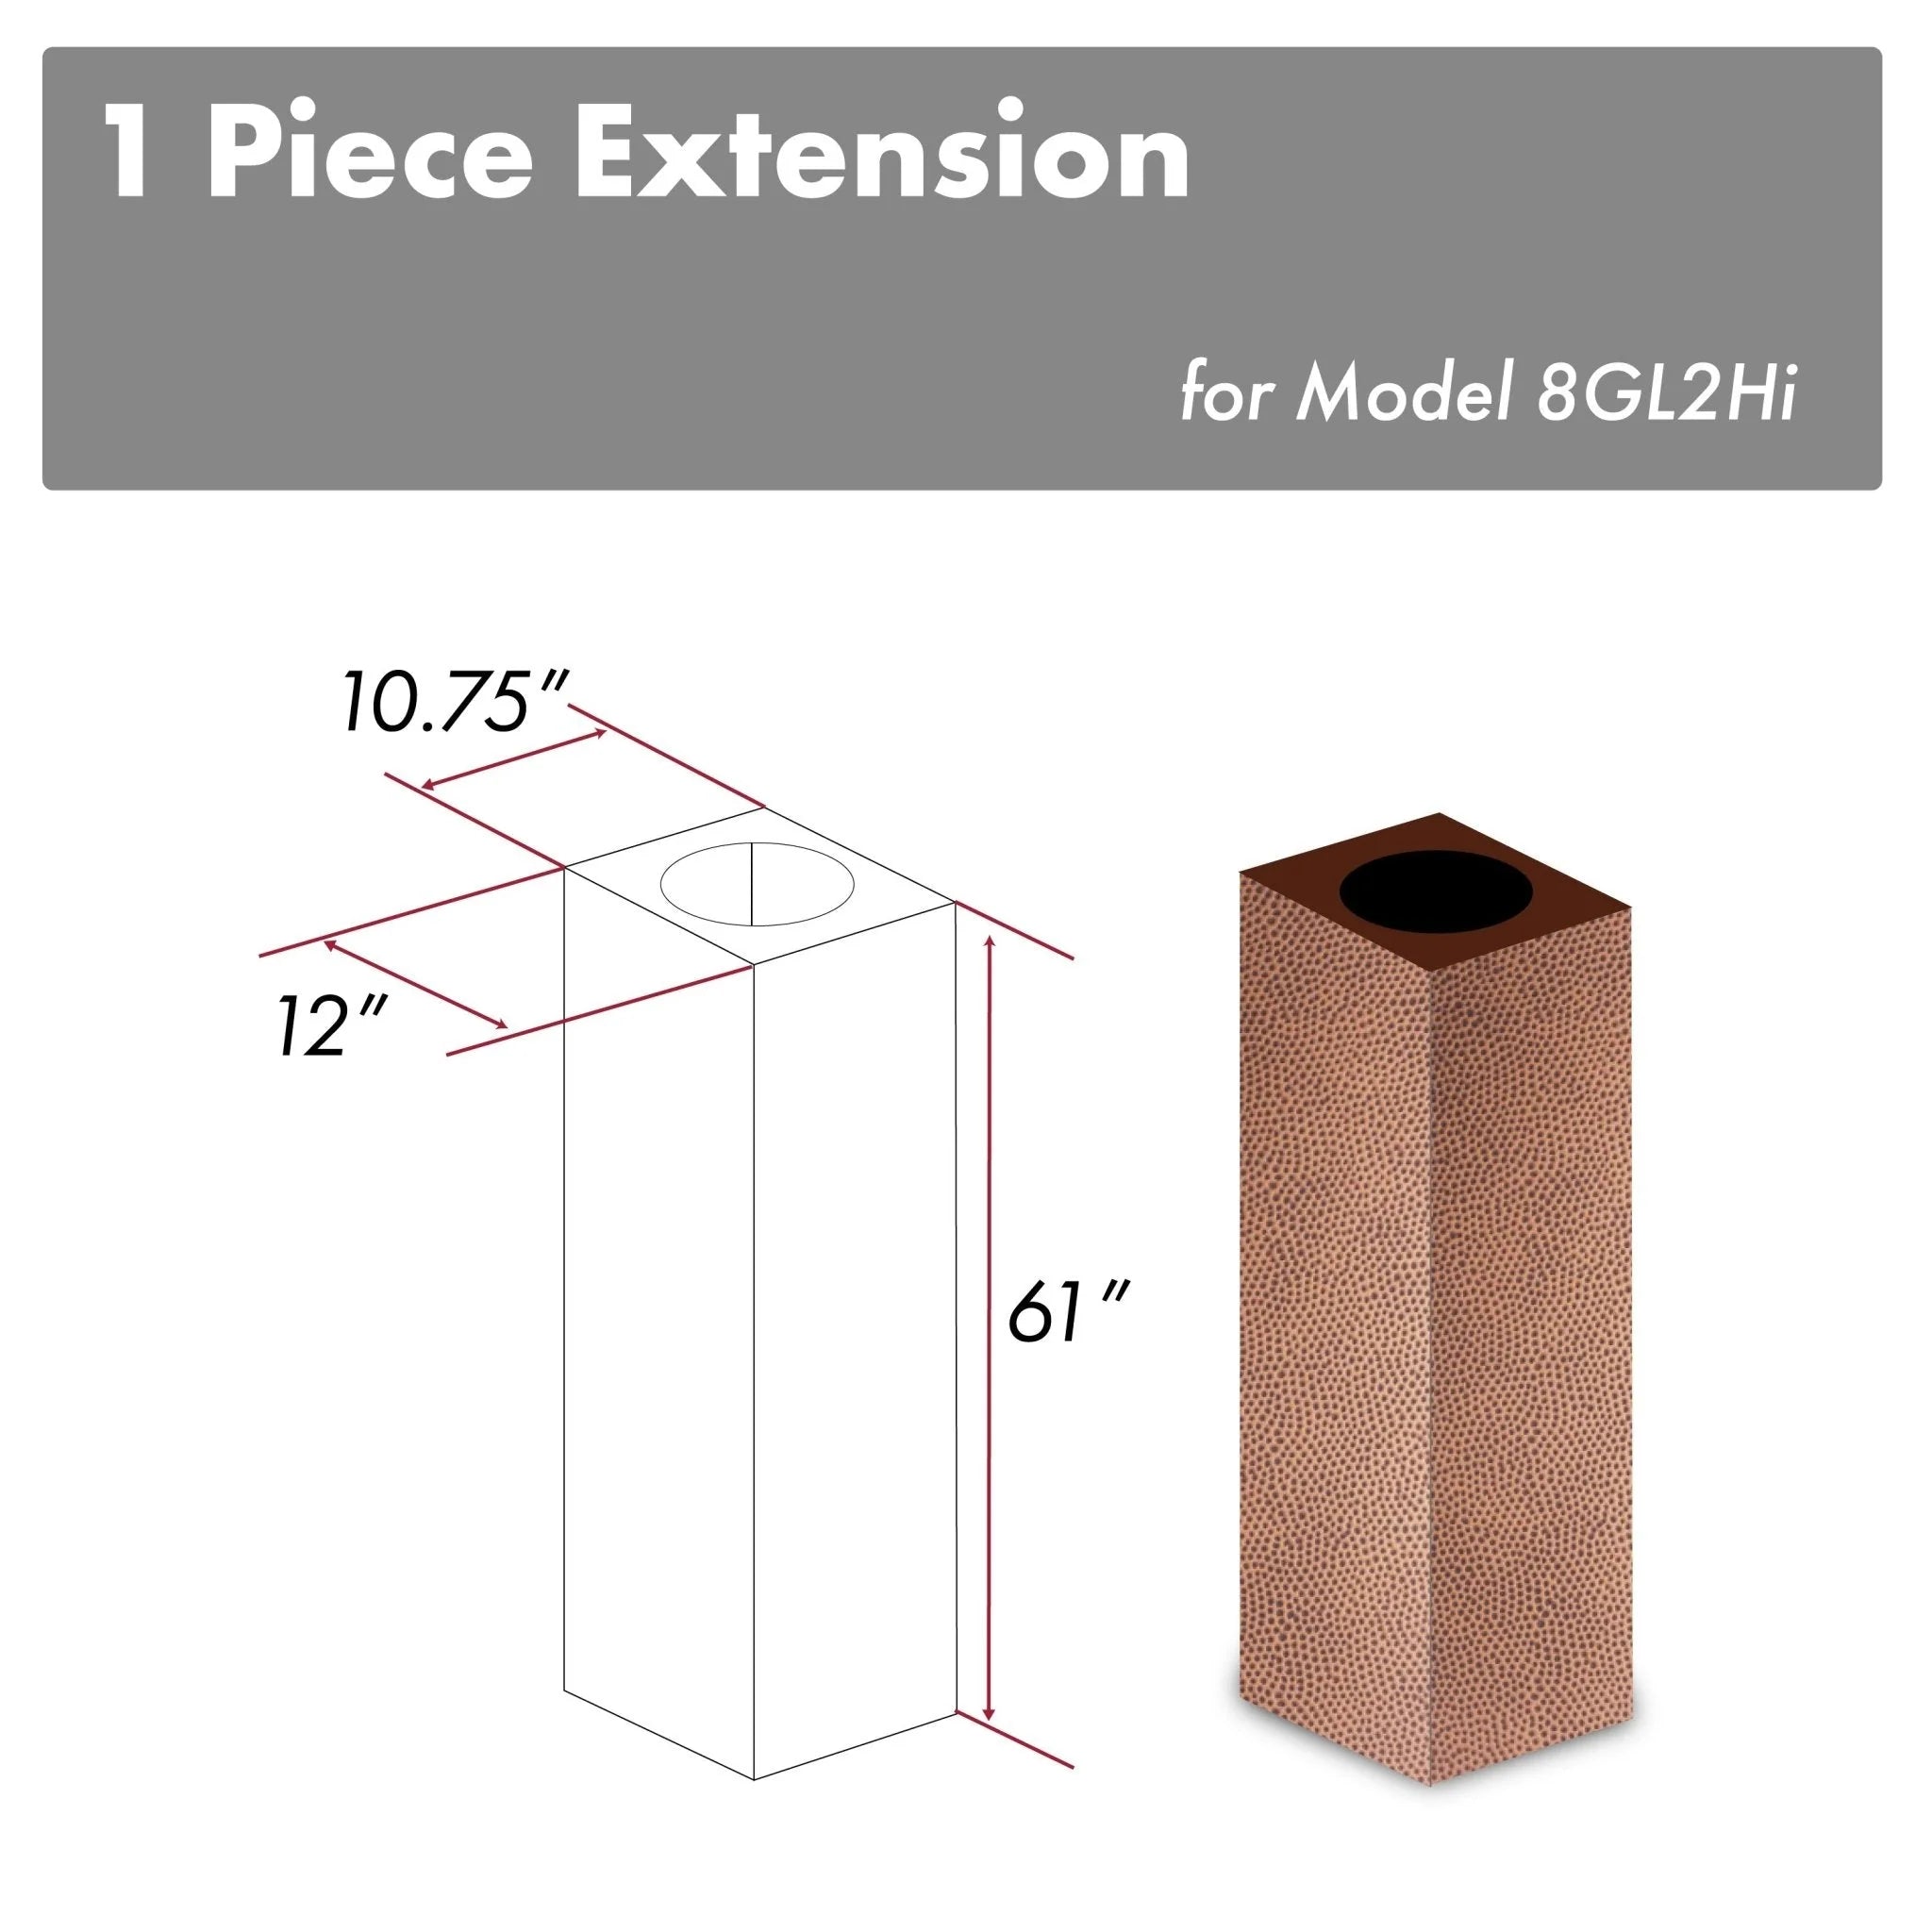 ZLINE 61" Hand Hammered Copper Finished Chimney Extension for Ceilings up to 12.5 ft. (8GL2iH-E)